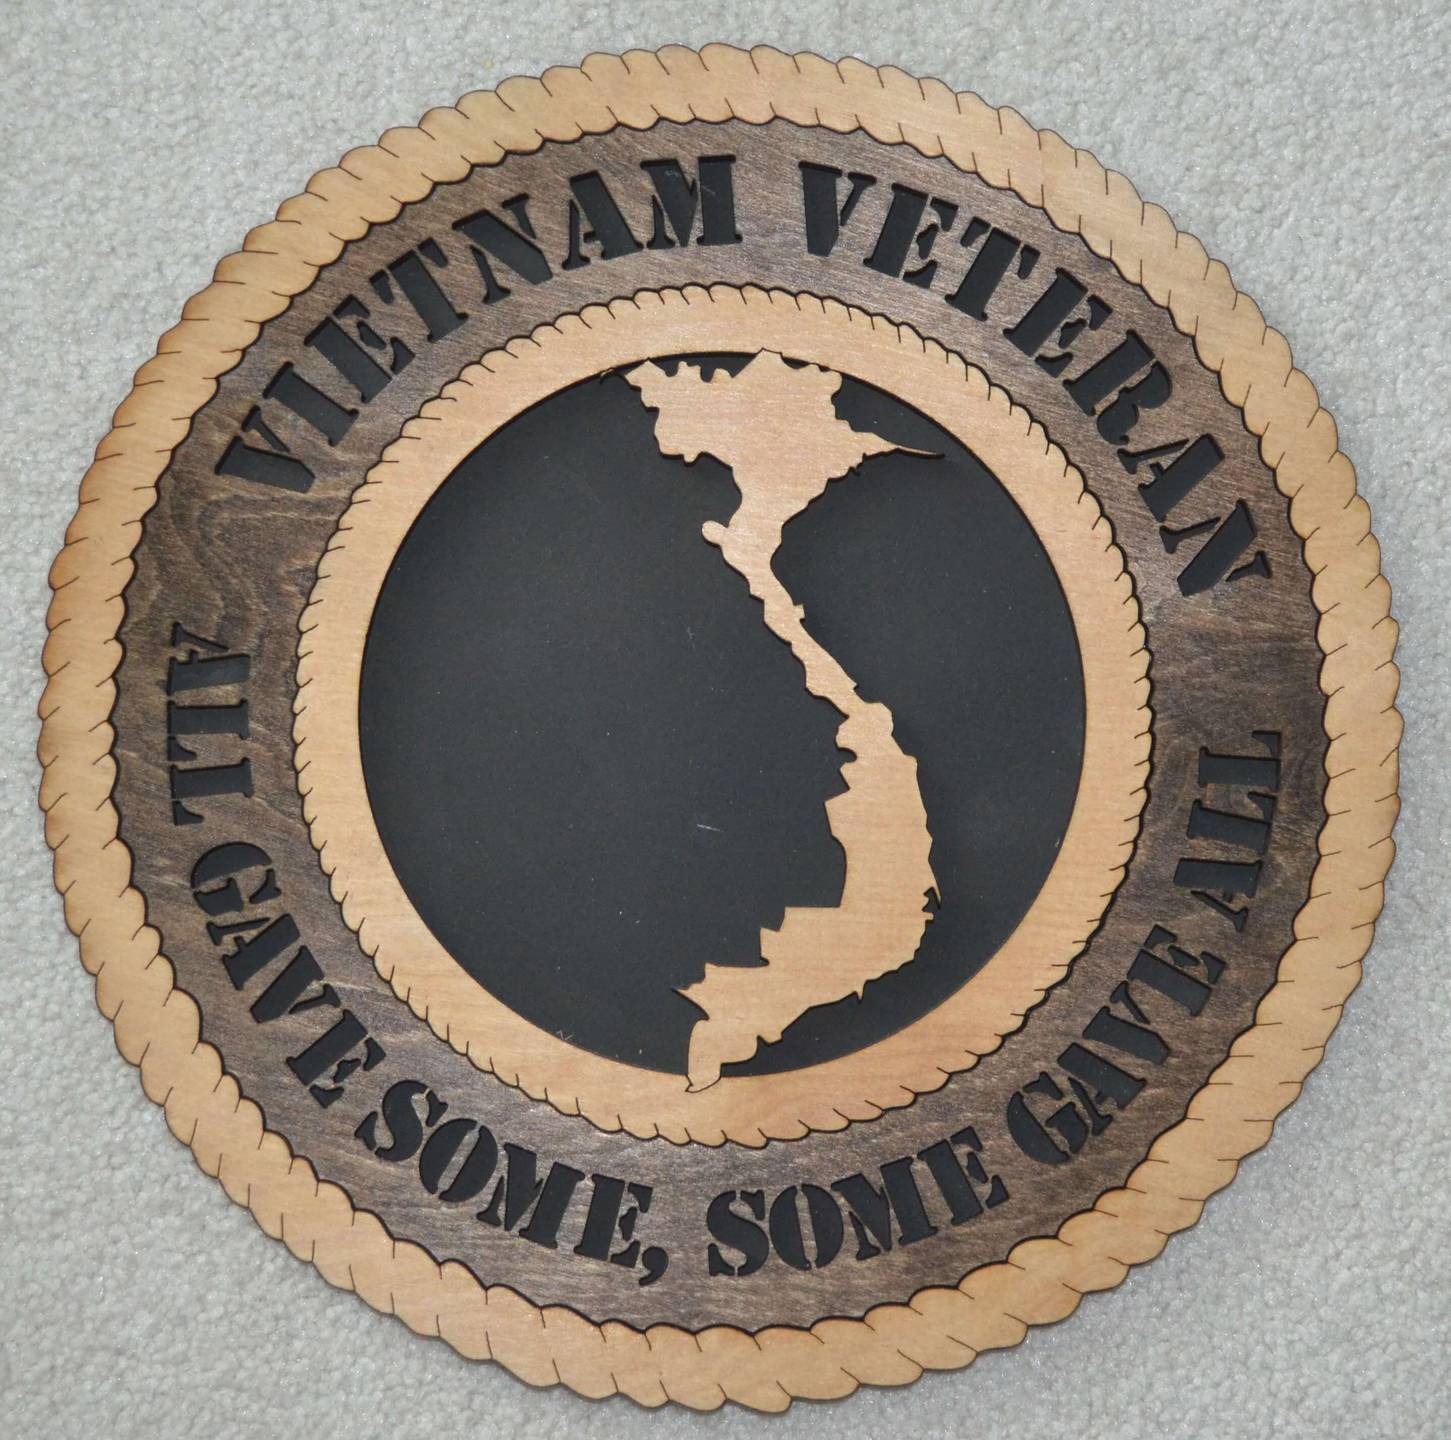 Laser-engraved token with an outline of Vietnam on it. Text reads: Vietnam Veteran; all gave some, some gave all.